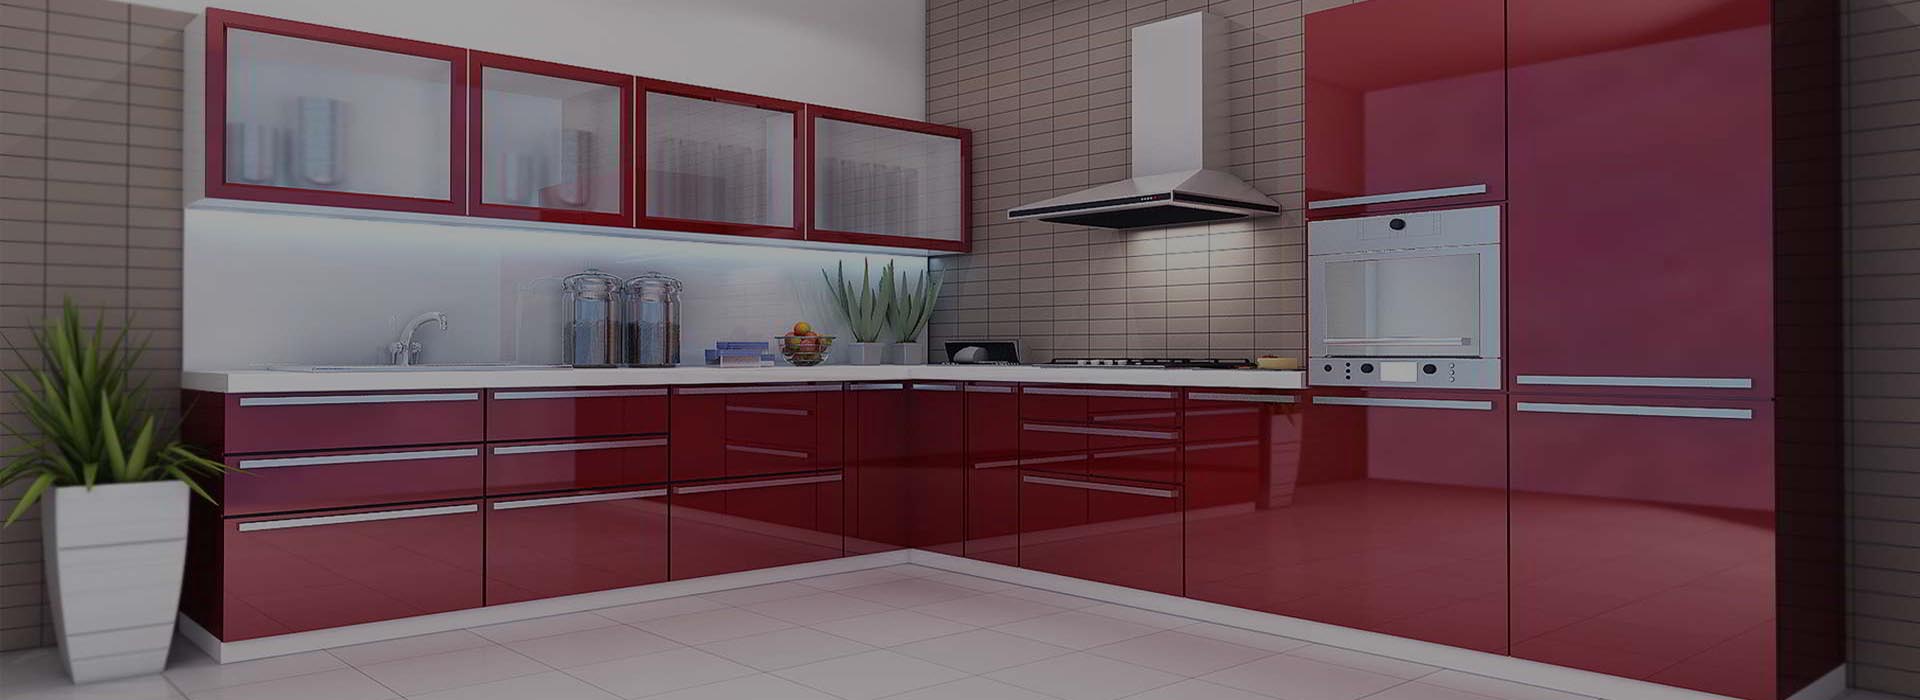 Design Interiors Of Your Kitchen – Give It A New Glam